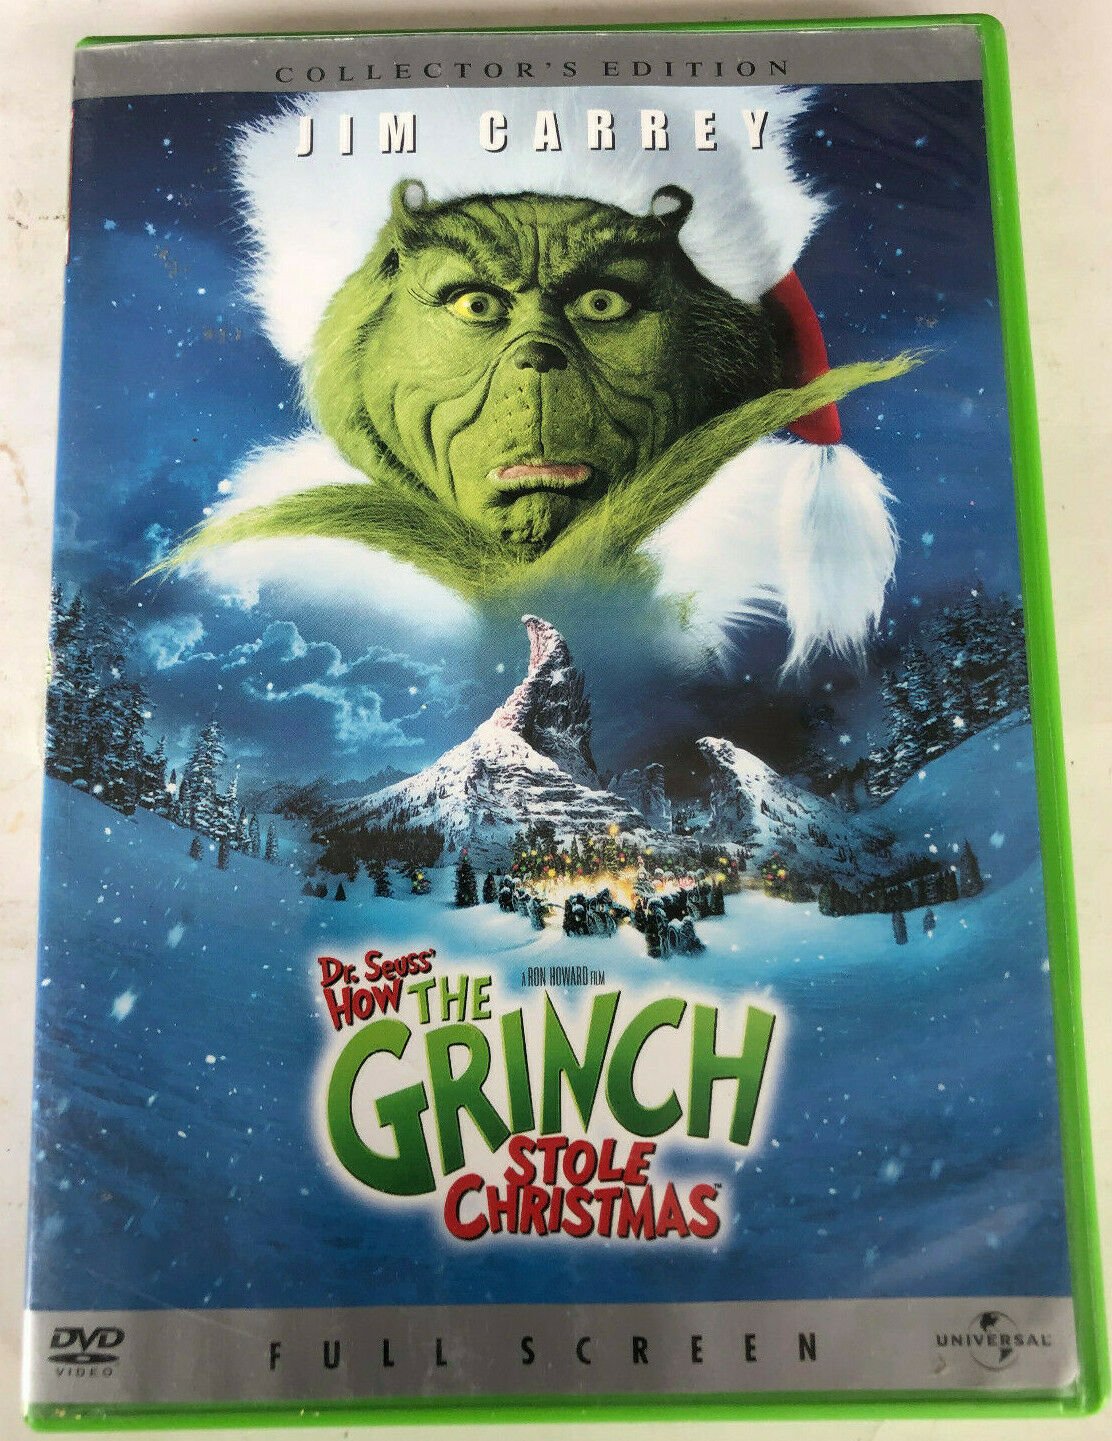 Dr. Seuss' How the Grinch Stole Christmas [Full Screen] Very Good